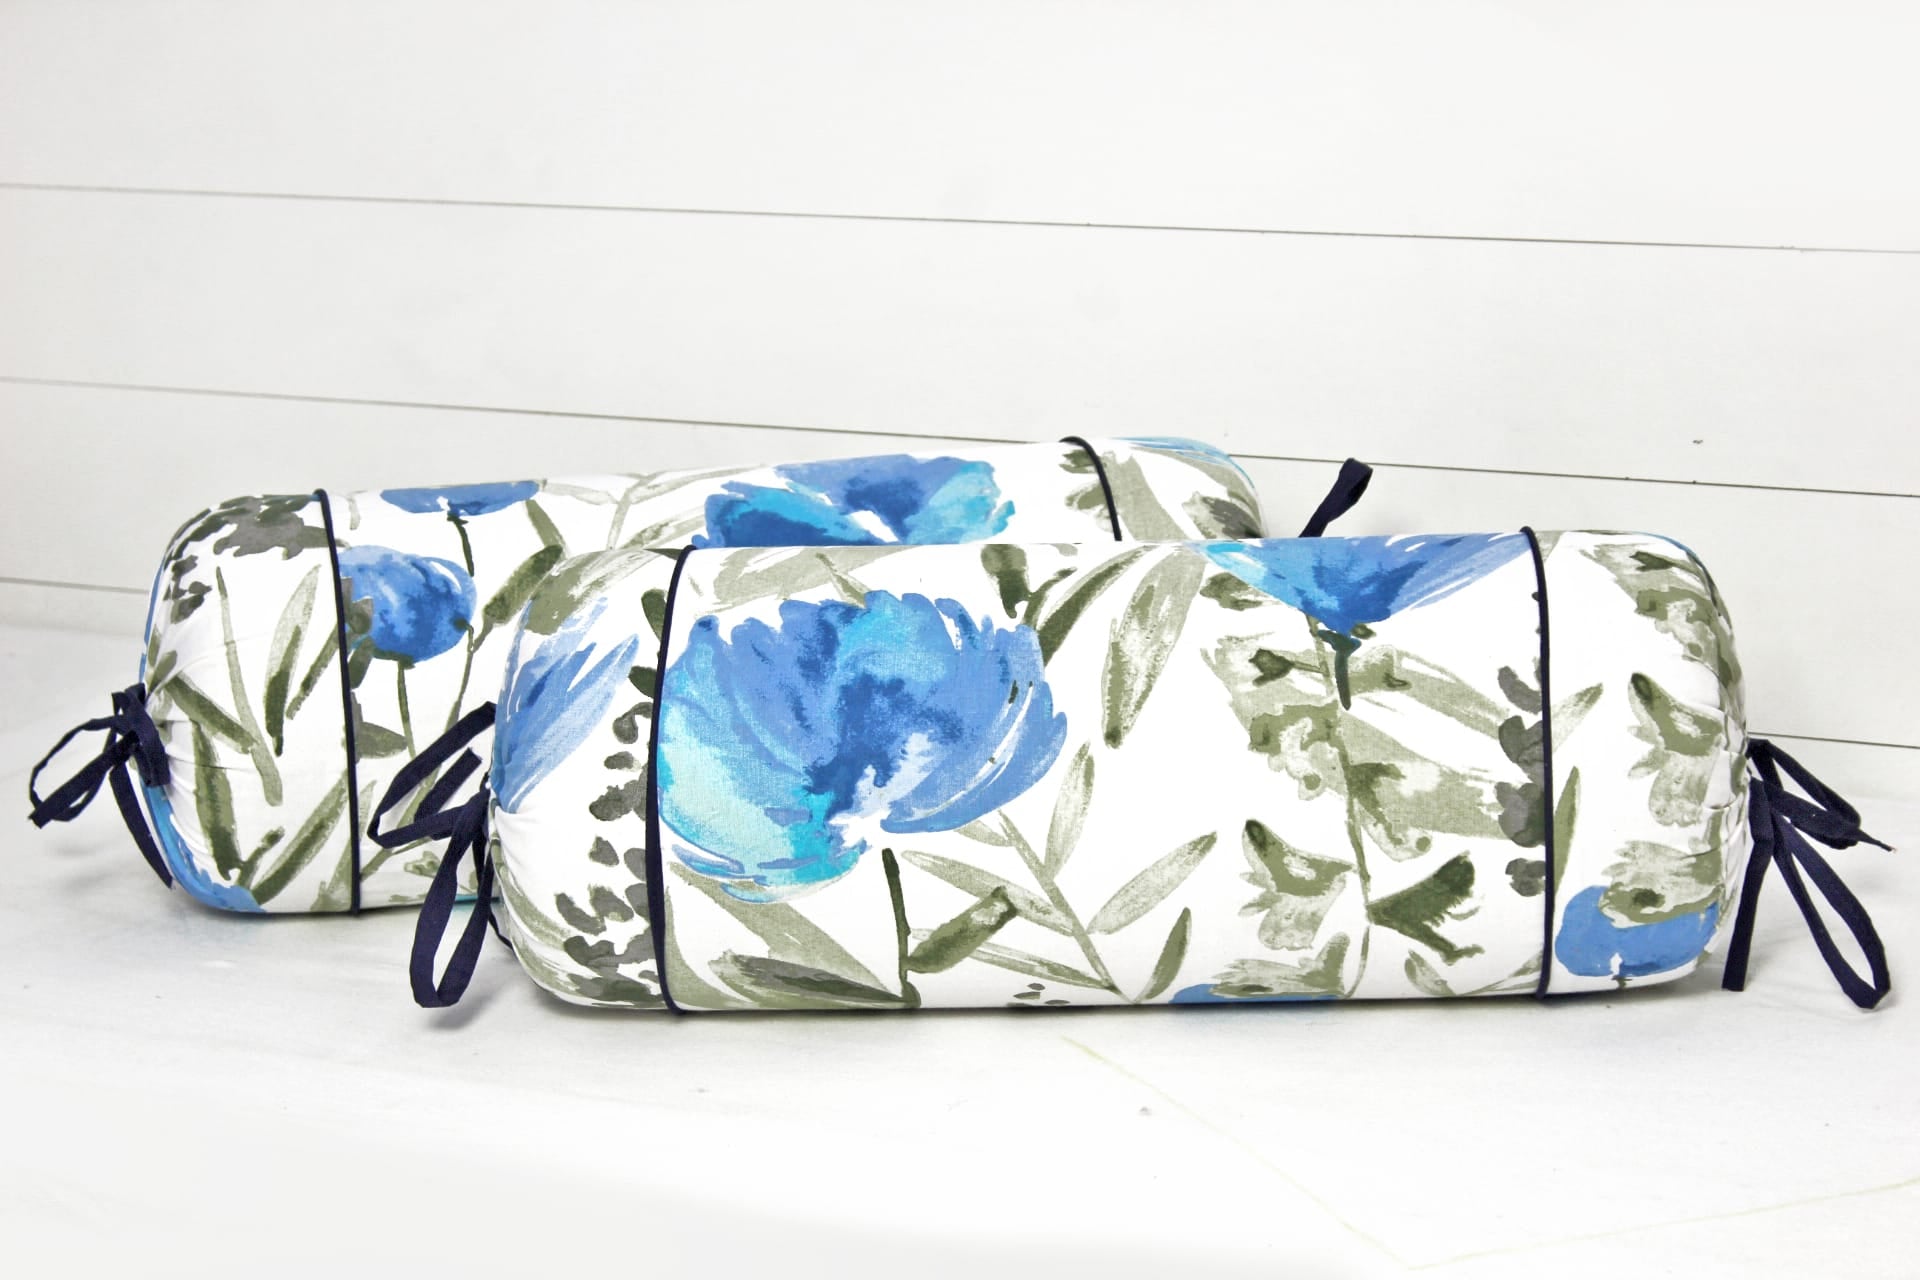 Soft Floral Print Cotton Bolster Cover in Blue online at best prices - 2Pcs 